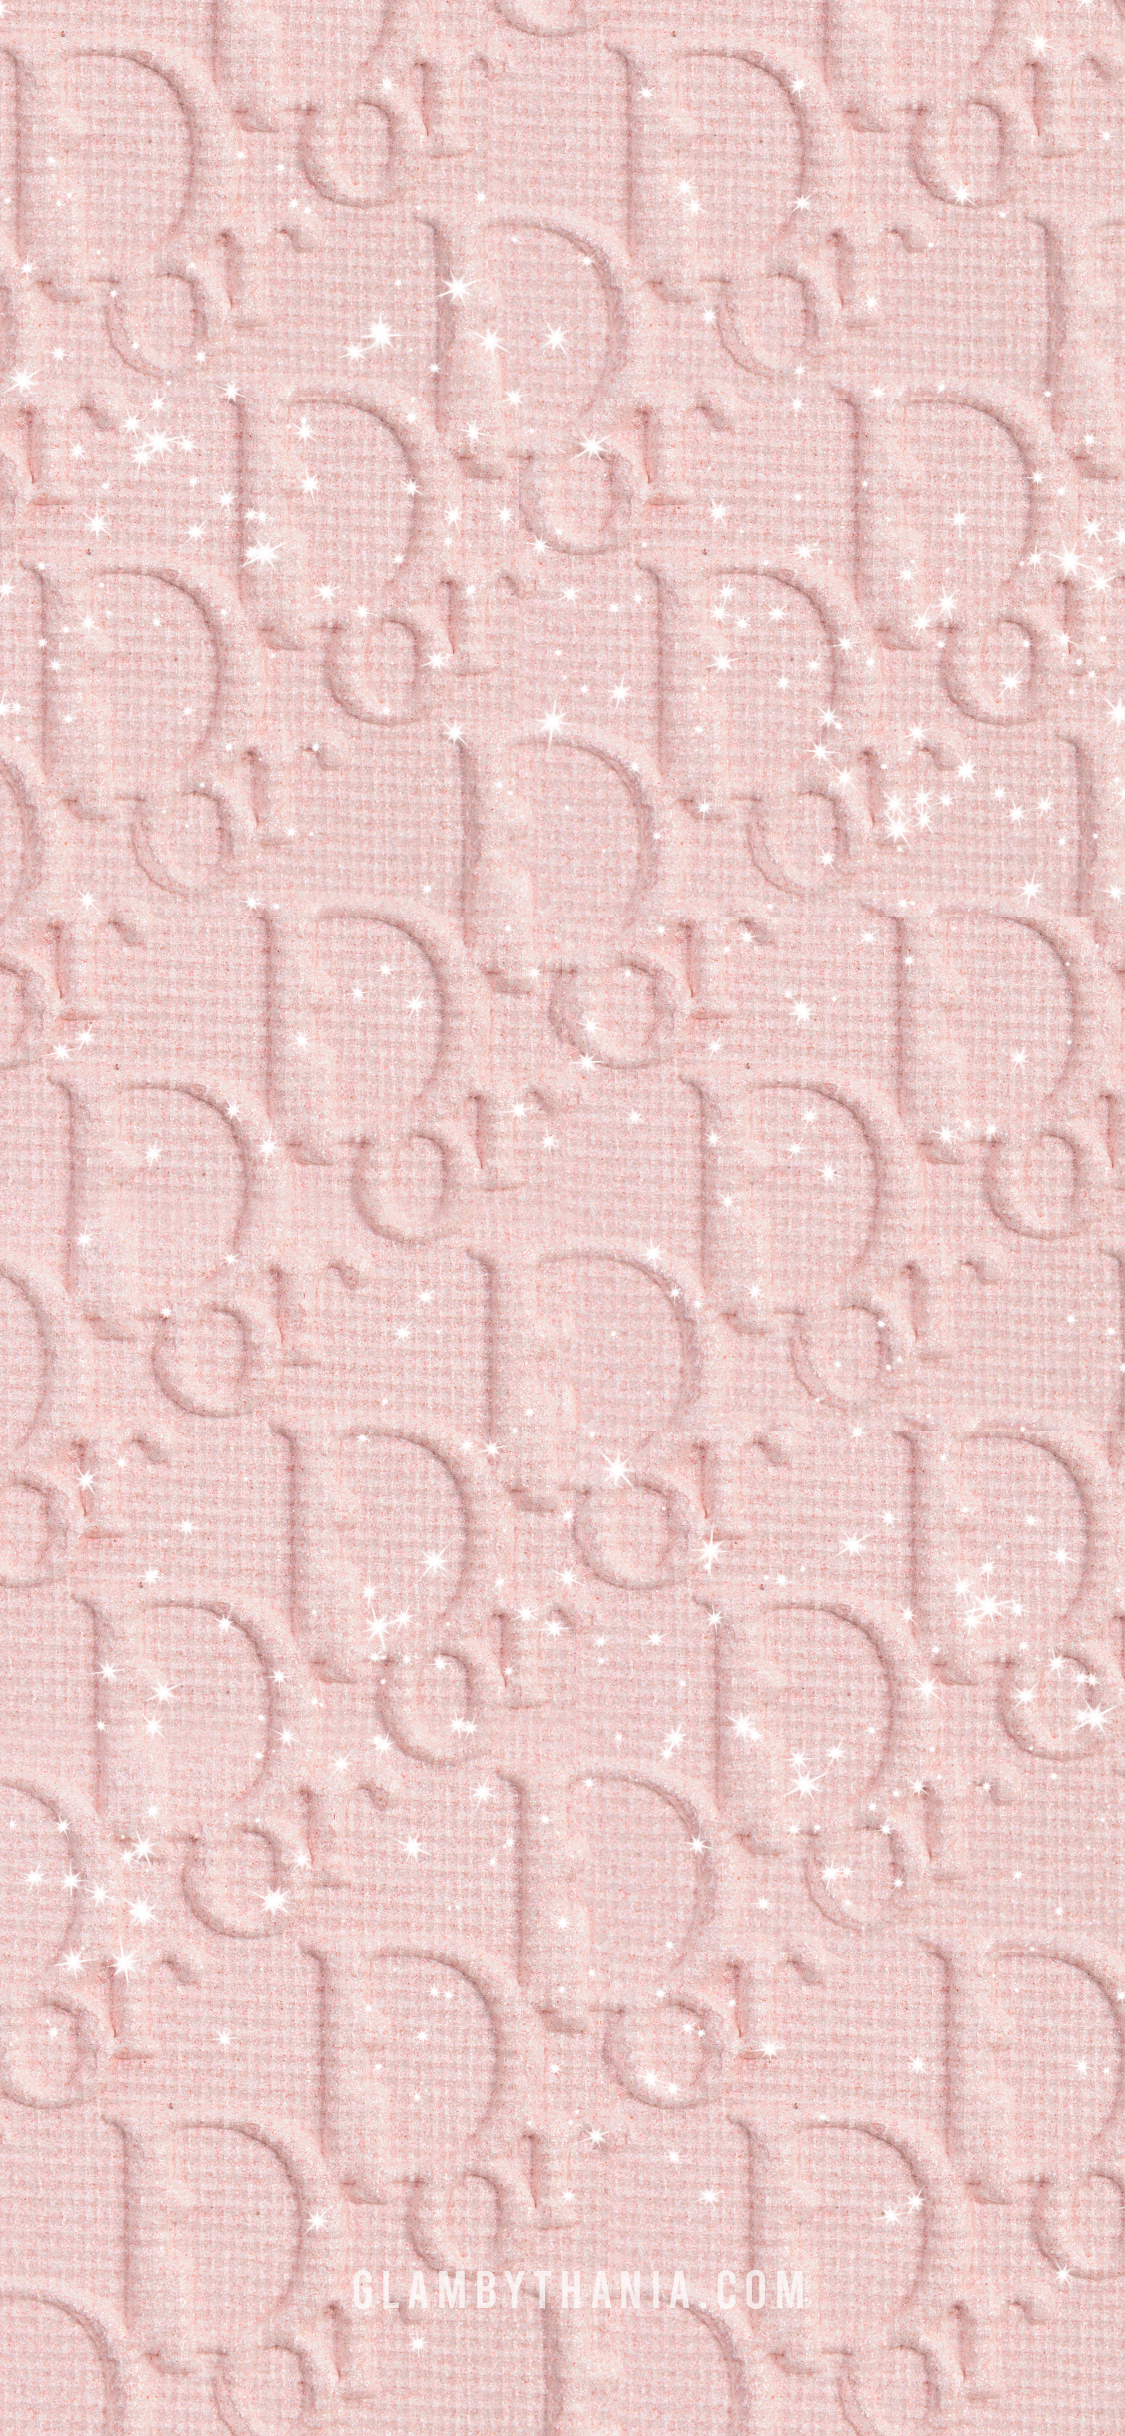 Aesthetic Dior Wallpapers - Wallpaper Cave